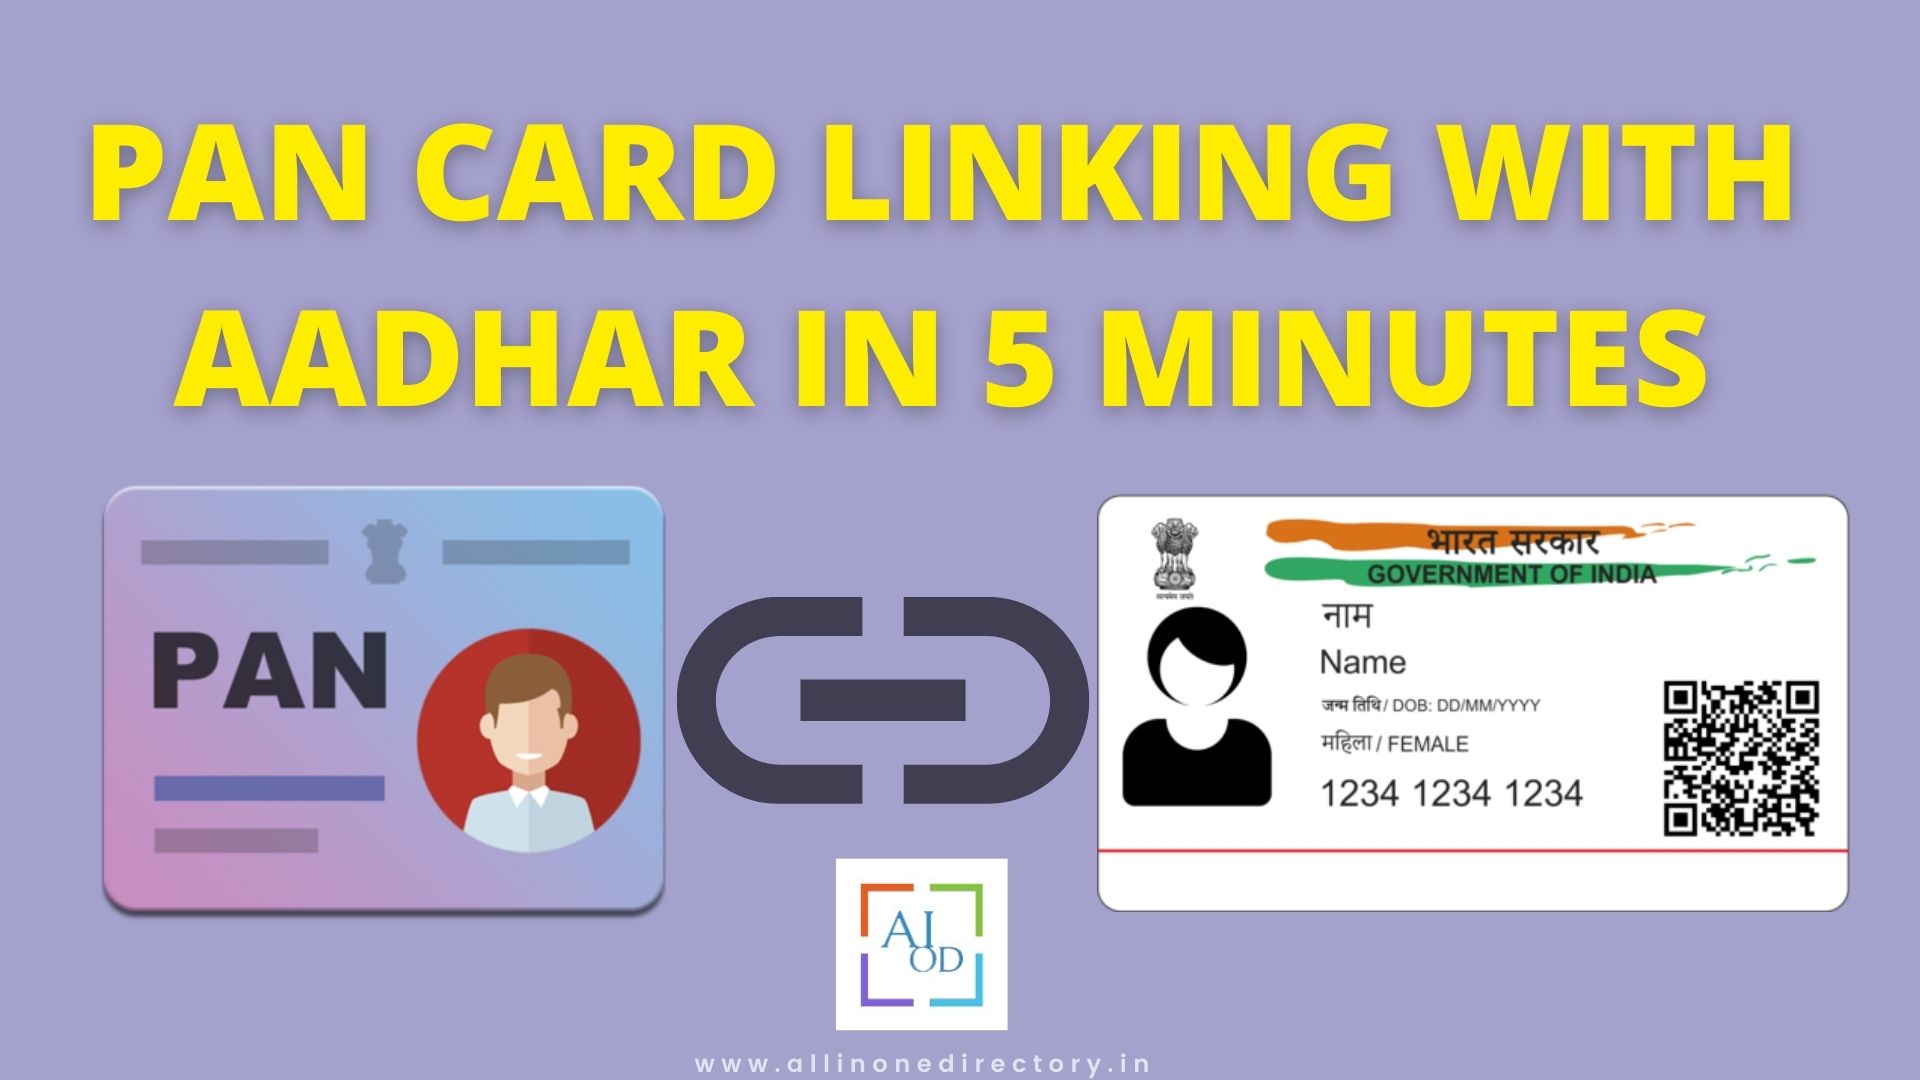 PAN CARD LINKING WITH AADHAR IN 5 MINUTES